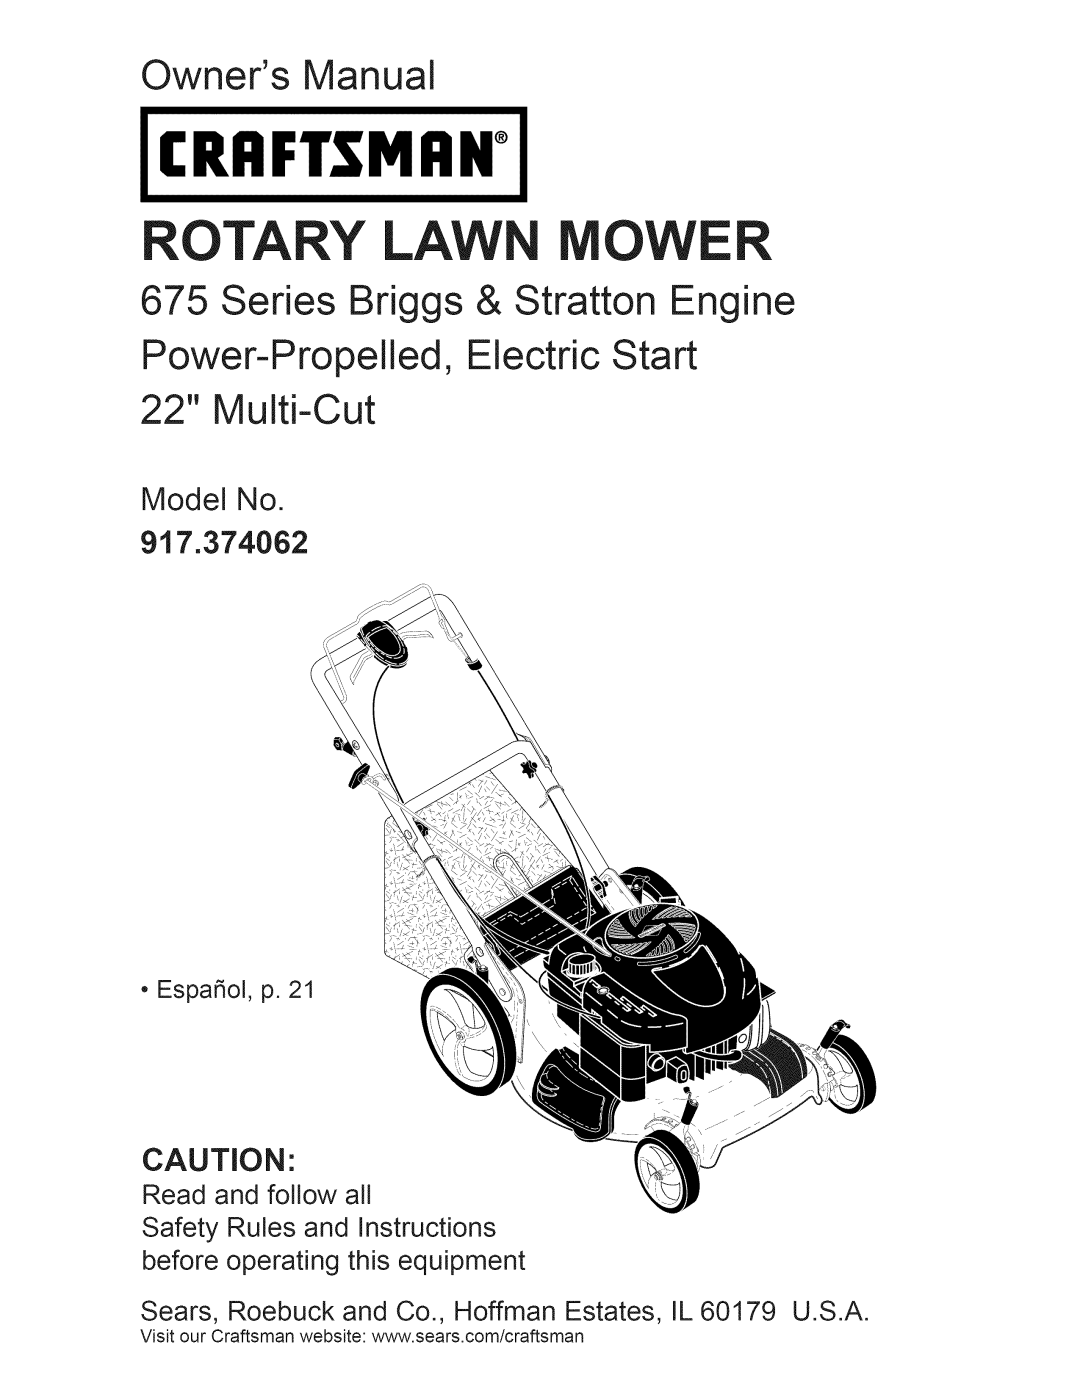 Craftsman 917.374062 manual Owners Manual, Series Briggs & Stratton Engine, Power-Propelled, Electric Start 22 Multi-Cut 